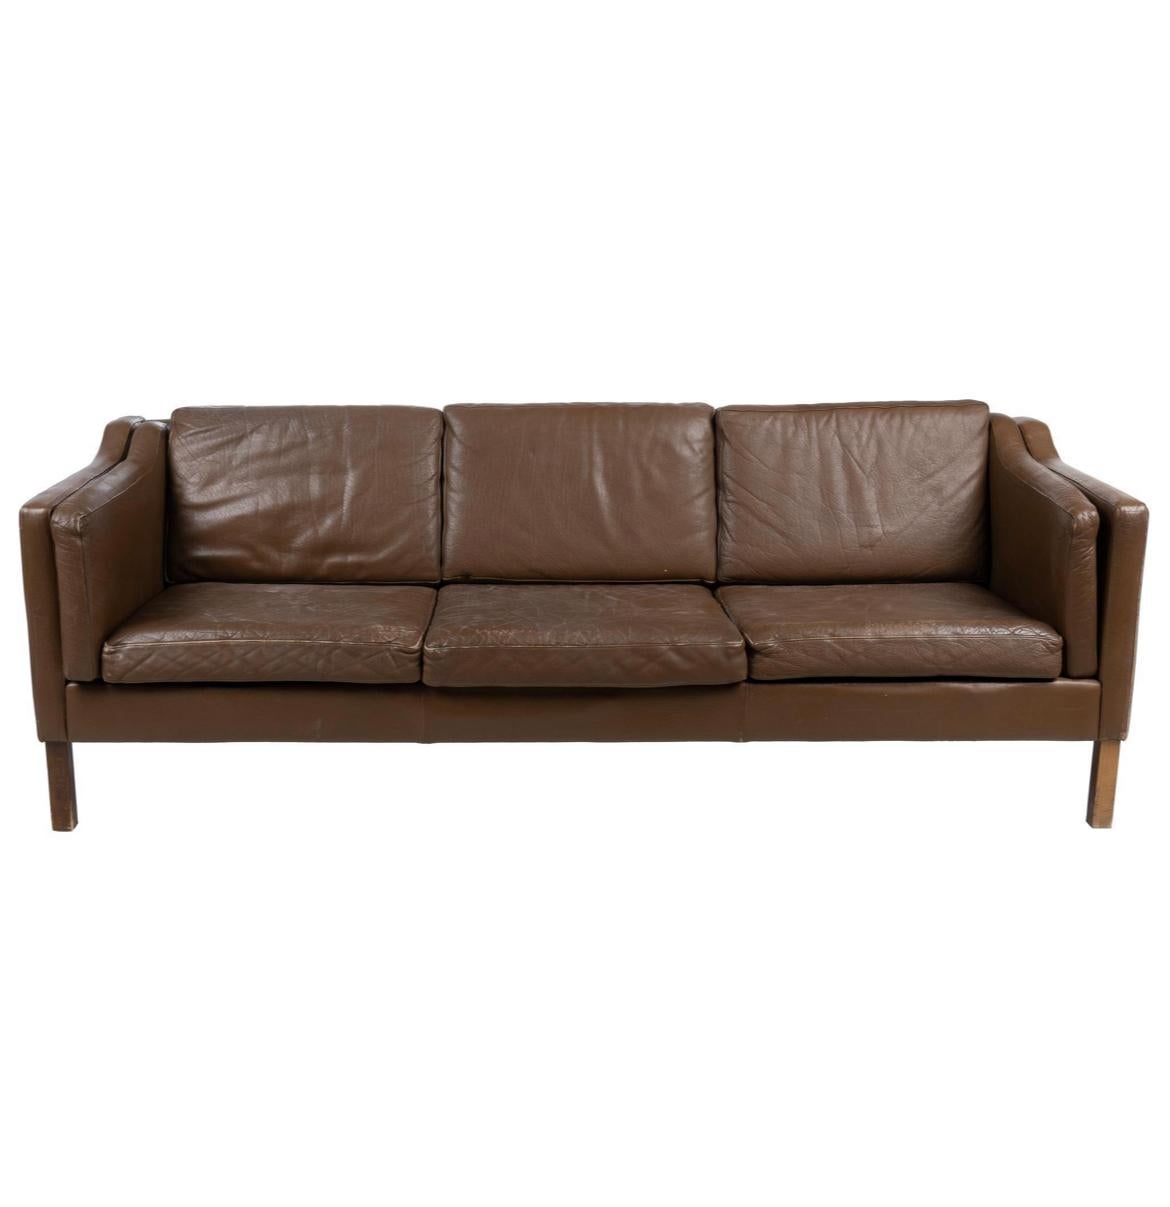 Mid century Danish modern beautiful brown leather 3 seat sofa wood legs. Style of Børge Mogensen.  Brown leather is soft and shows little signs of use but broken in nicely. Great Danish Modern sofa. Great condition. Sofa is made by Stouby in